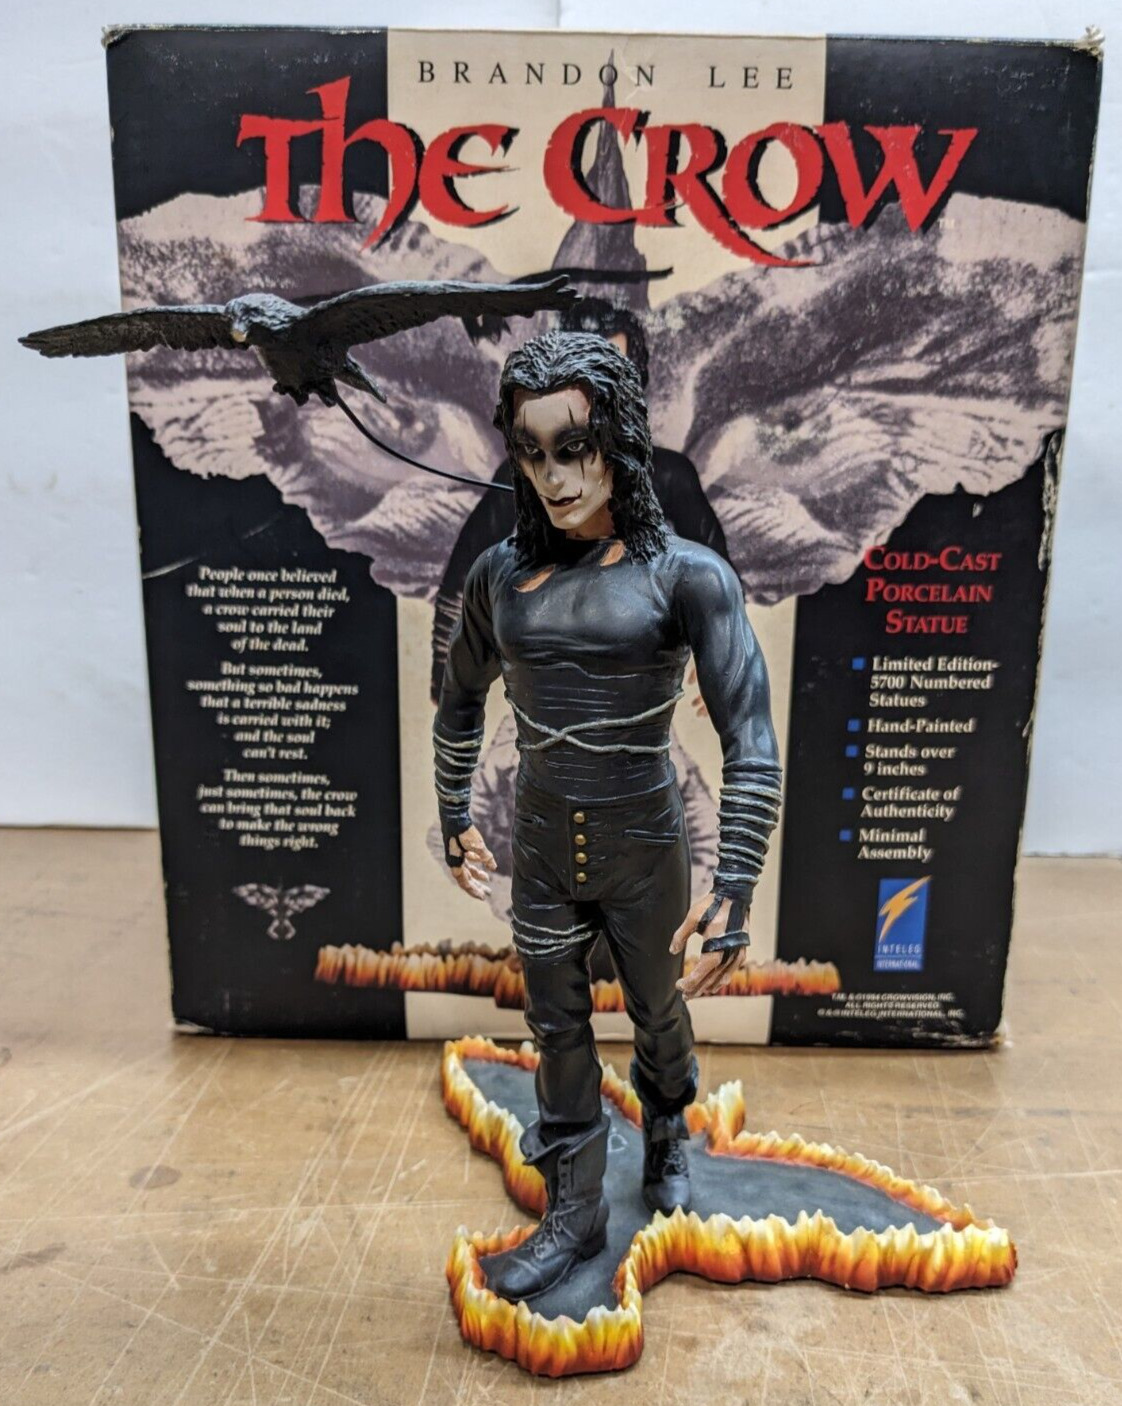 Brandon Lee The Crow Statue Inteleg 1994 Signed by James O'Barr MINOR CHIP